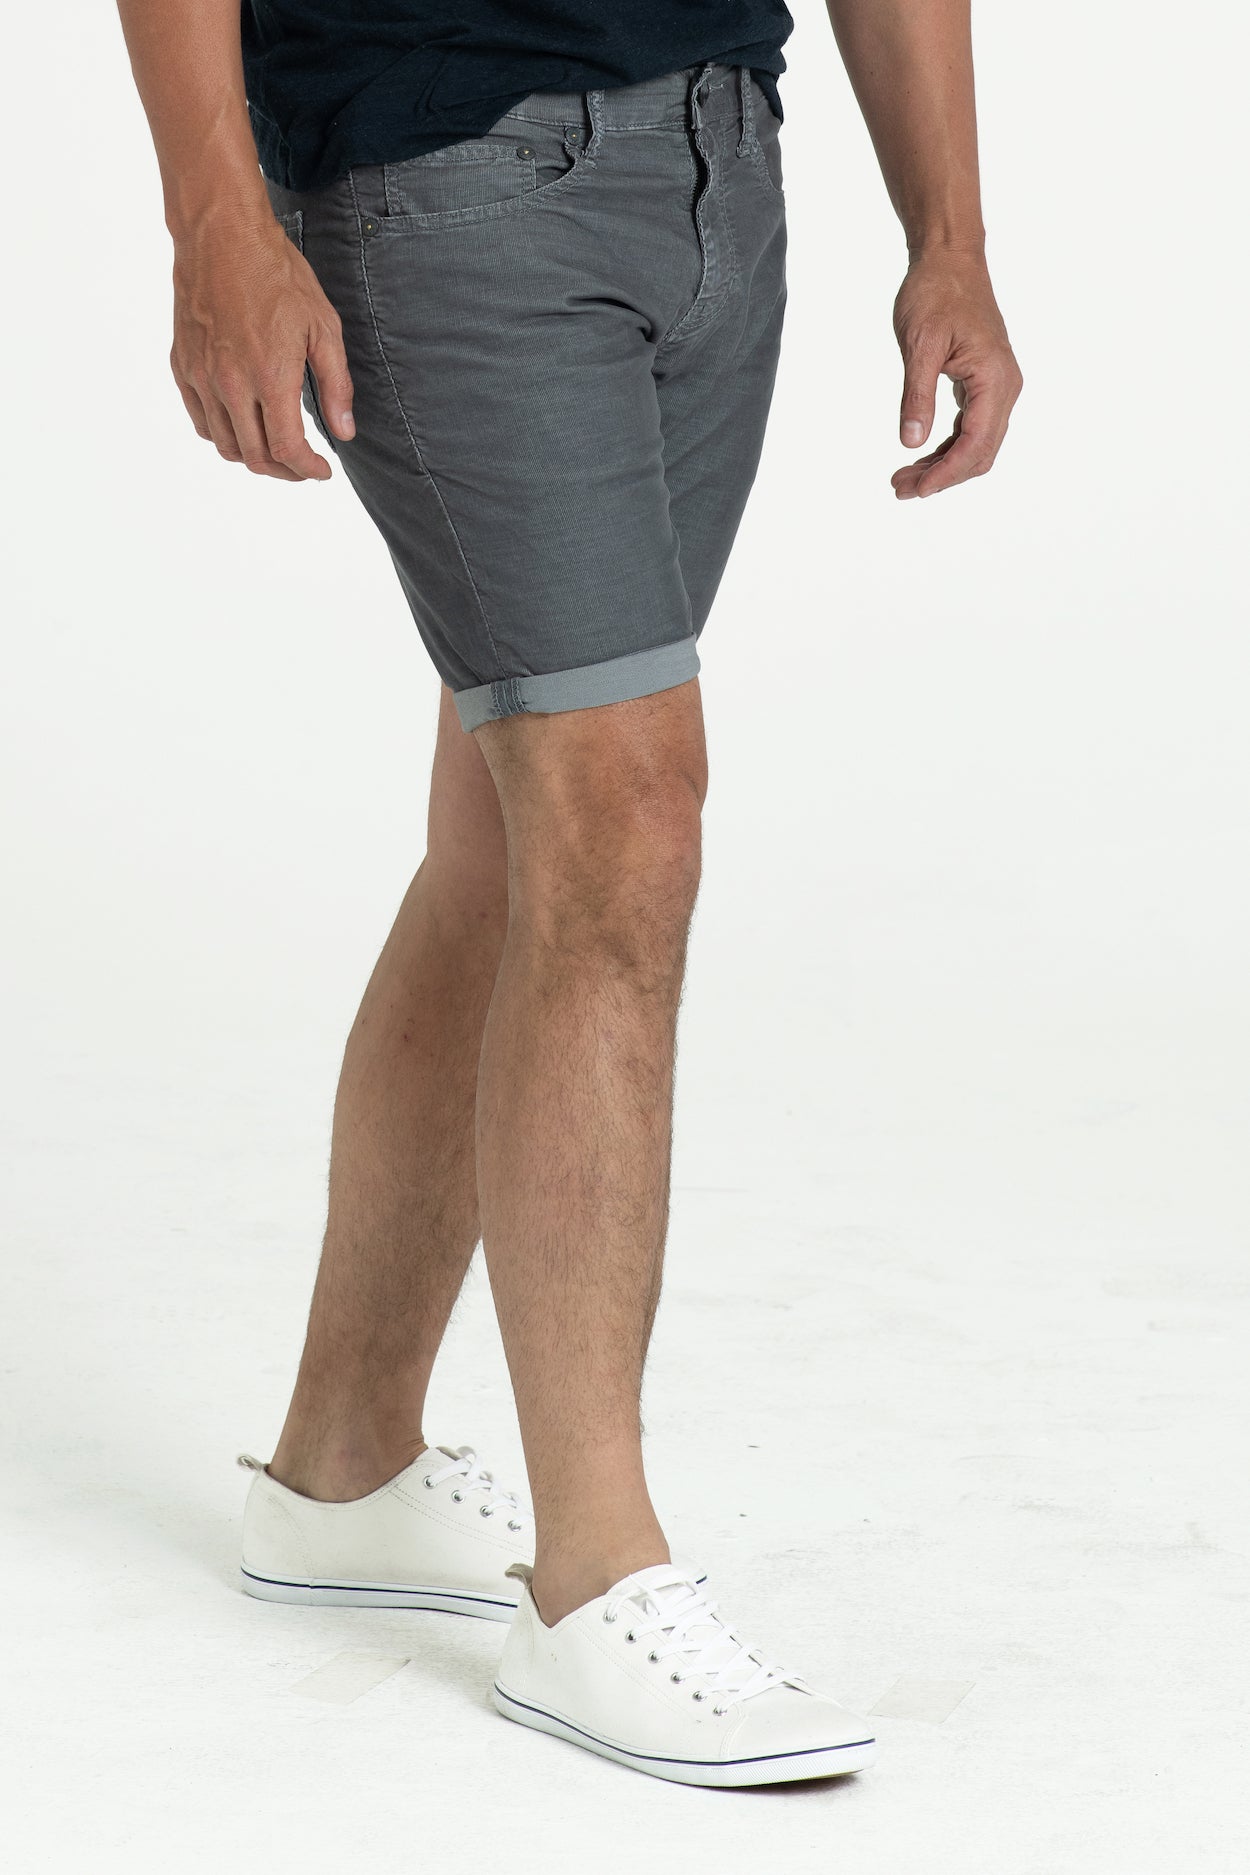 ROLL UP CORD SHORTS IN IRON